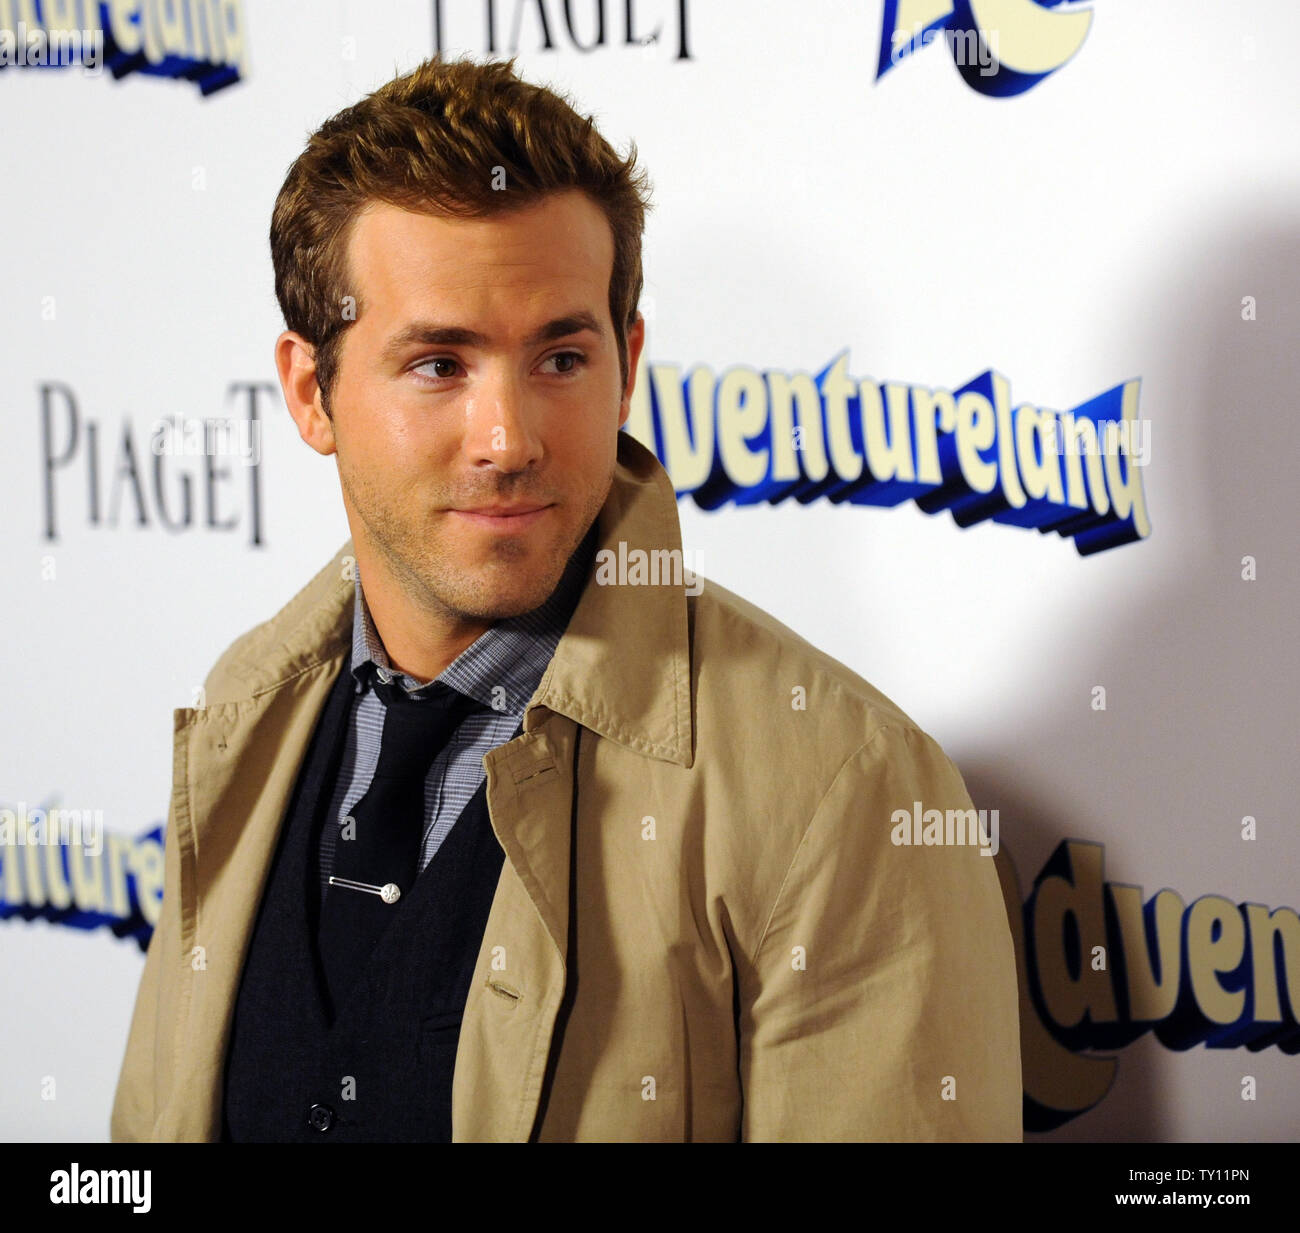 Cast member Ryan Reynolds attends the premiere of the motion picture comedy 'Adventureland' in Los Angeles on March 16, 2009.  (UPI Photo/Jim Ruymen) Stock Photo